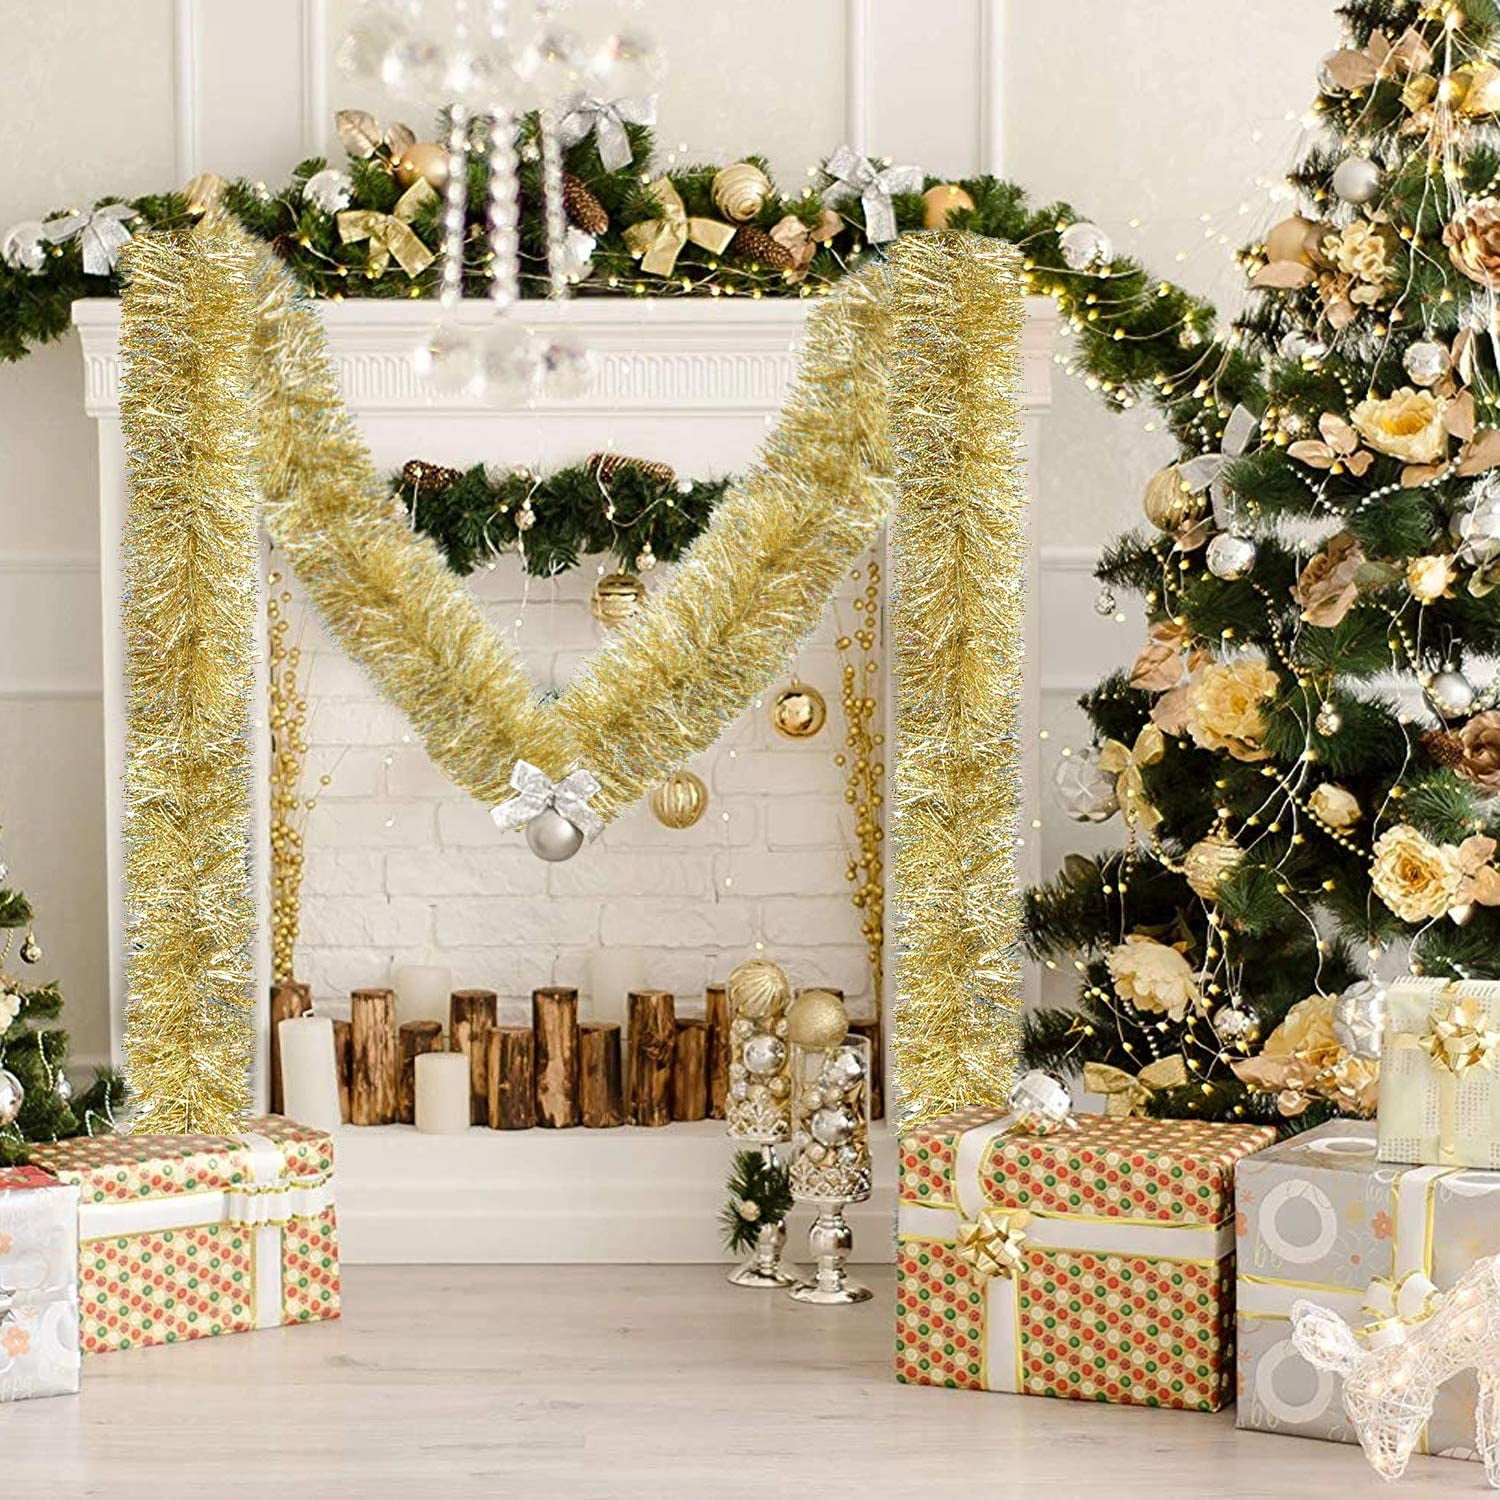 MXJFYY Christmas Decorations 5M Foil Tinsel Garland Decorations for Wedding Birthday Halloween Thanksgiving New Year Party Tinsel Garland Christmas Tree Decorations Golden